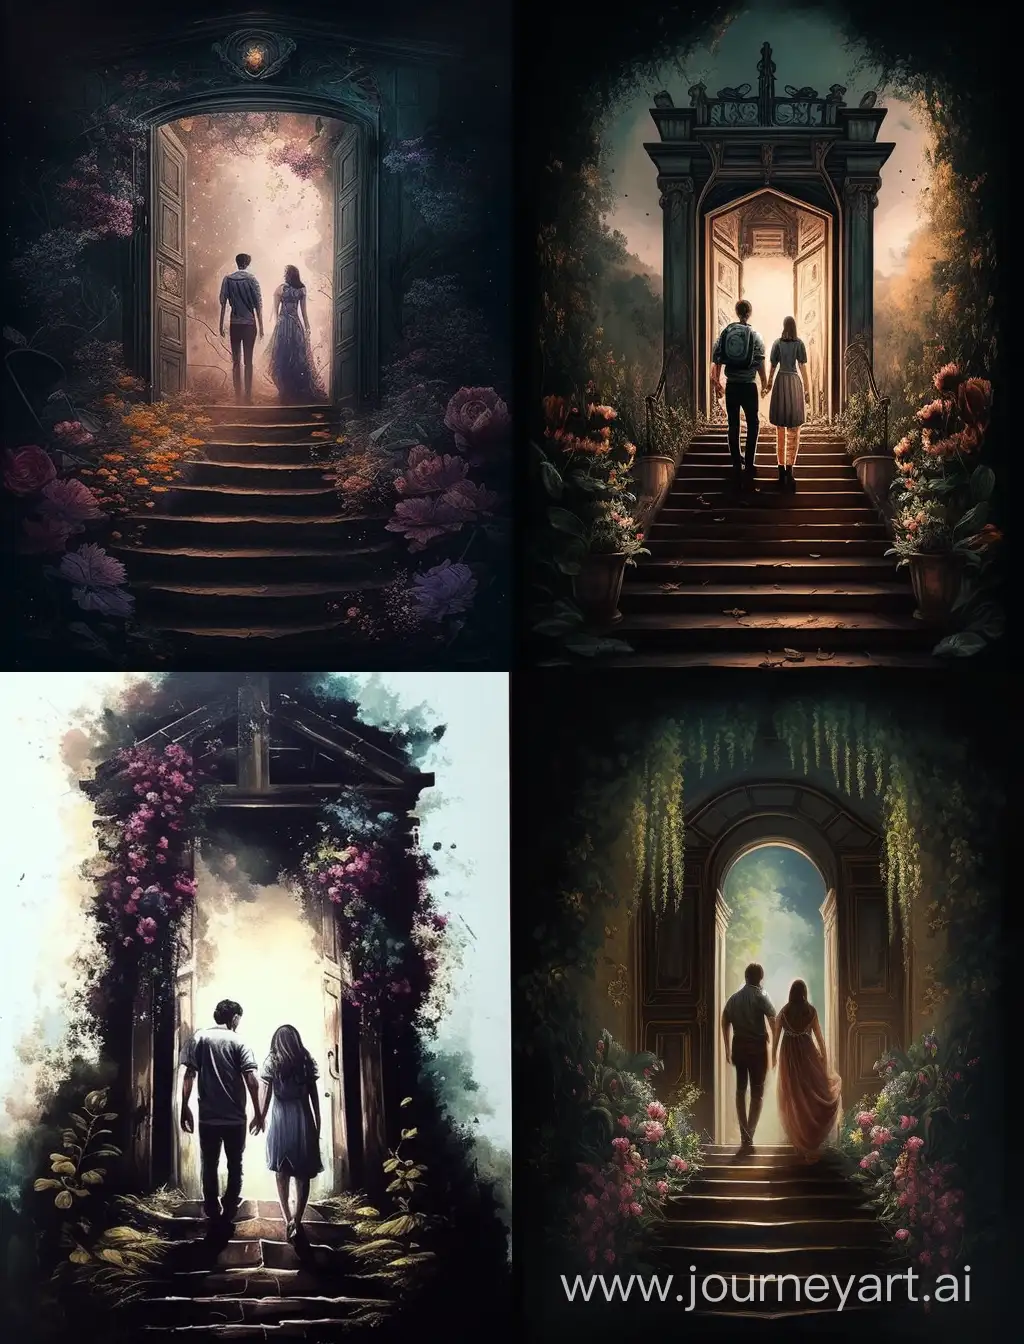 Couple-Ascending-Floral-Staircase-Towards-Illuminated-Doorway